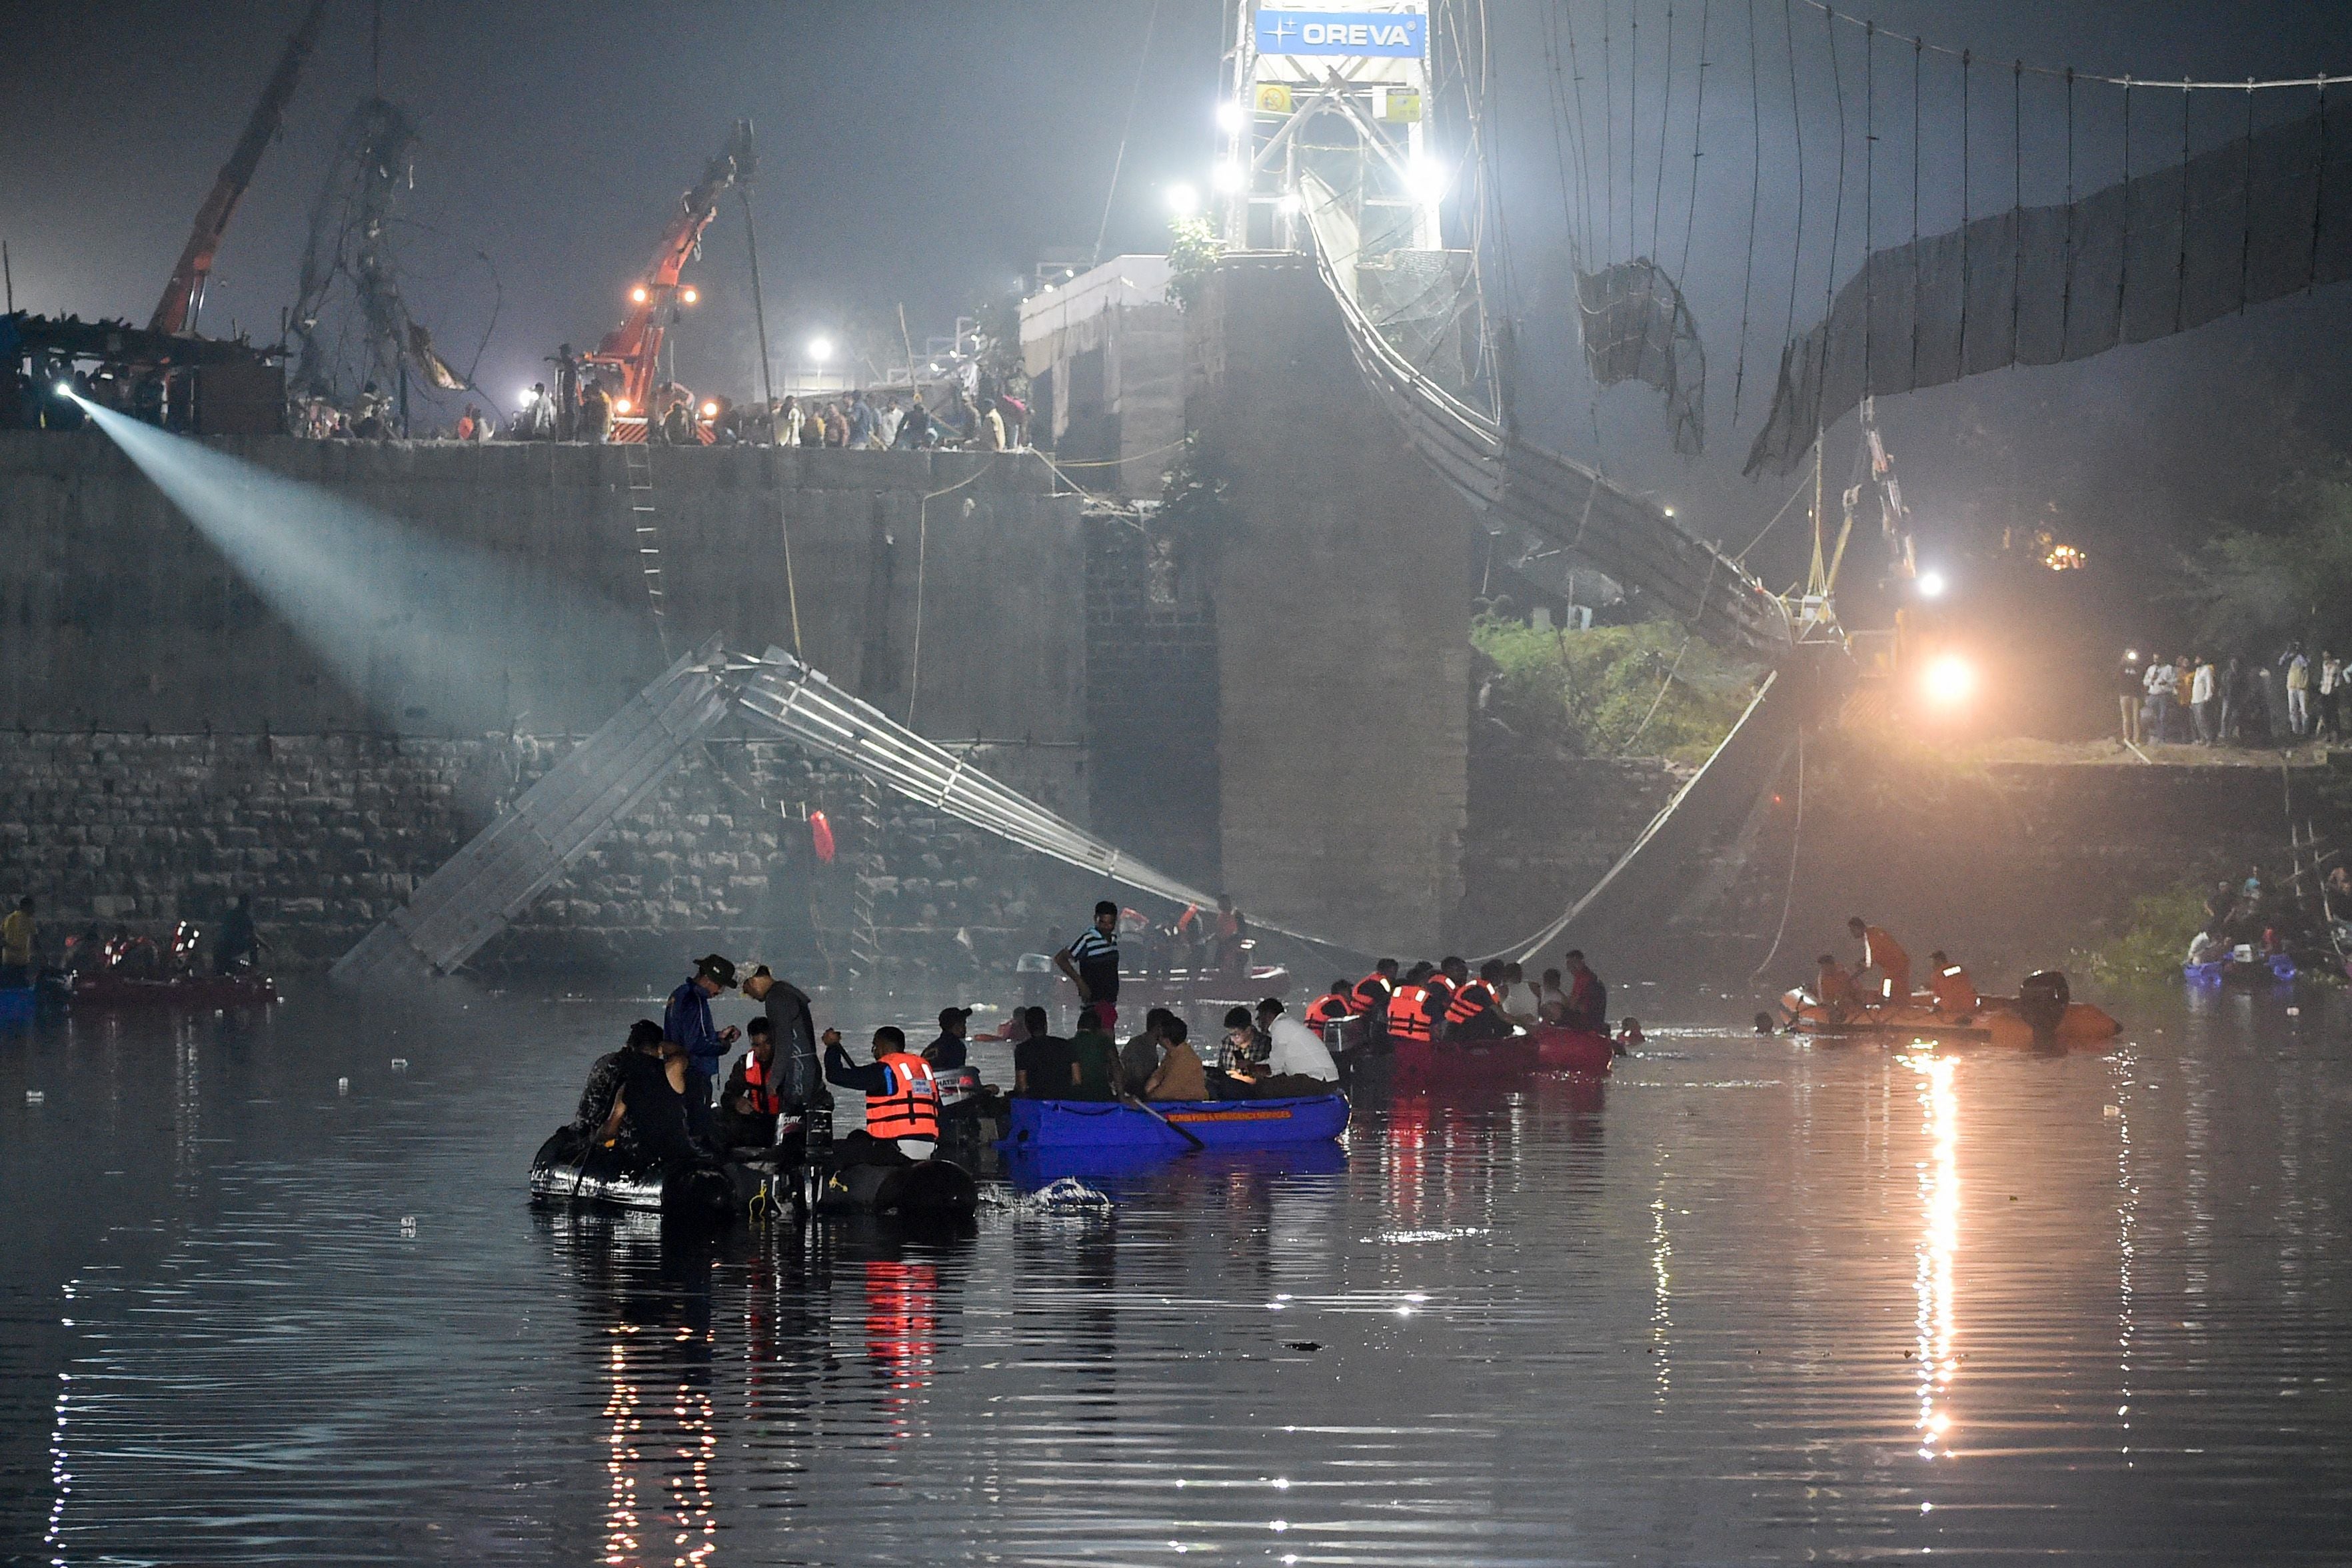 Indian rescue personnel conduct search operations after the bridge collapse